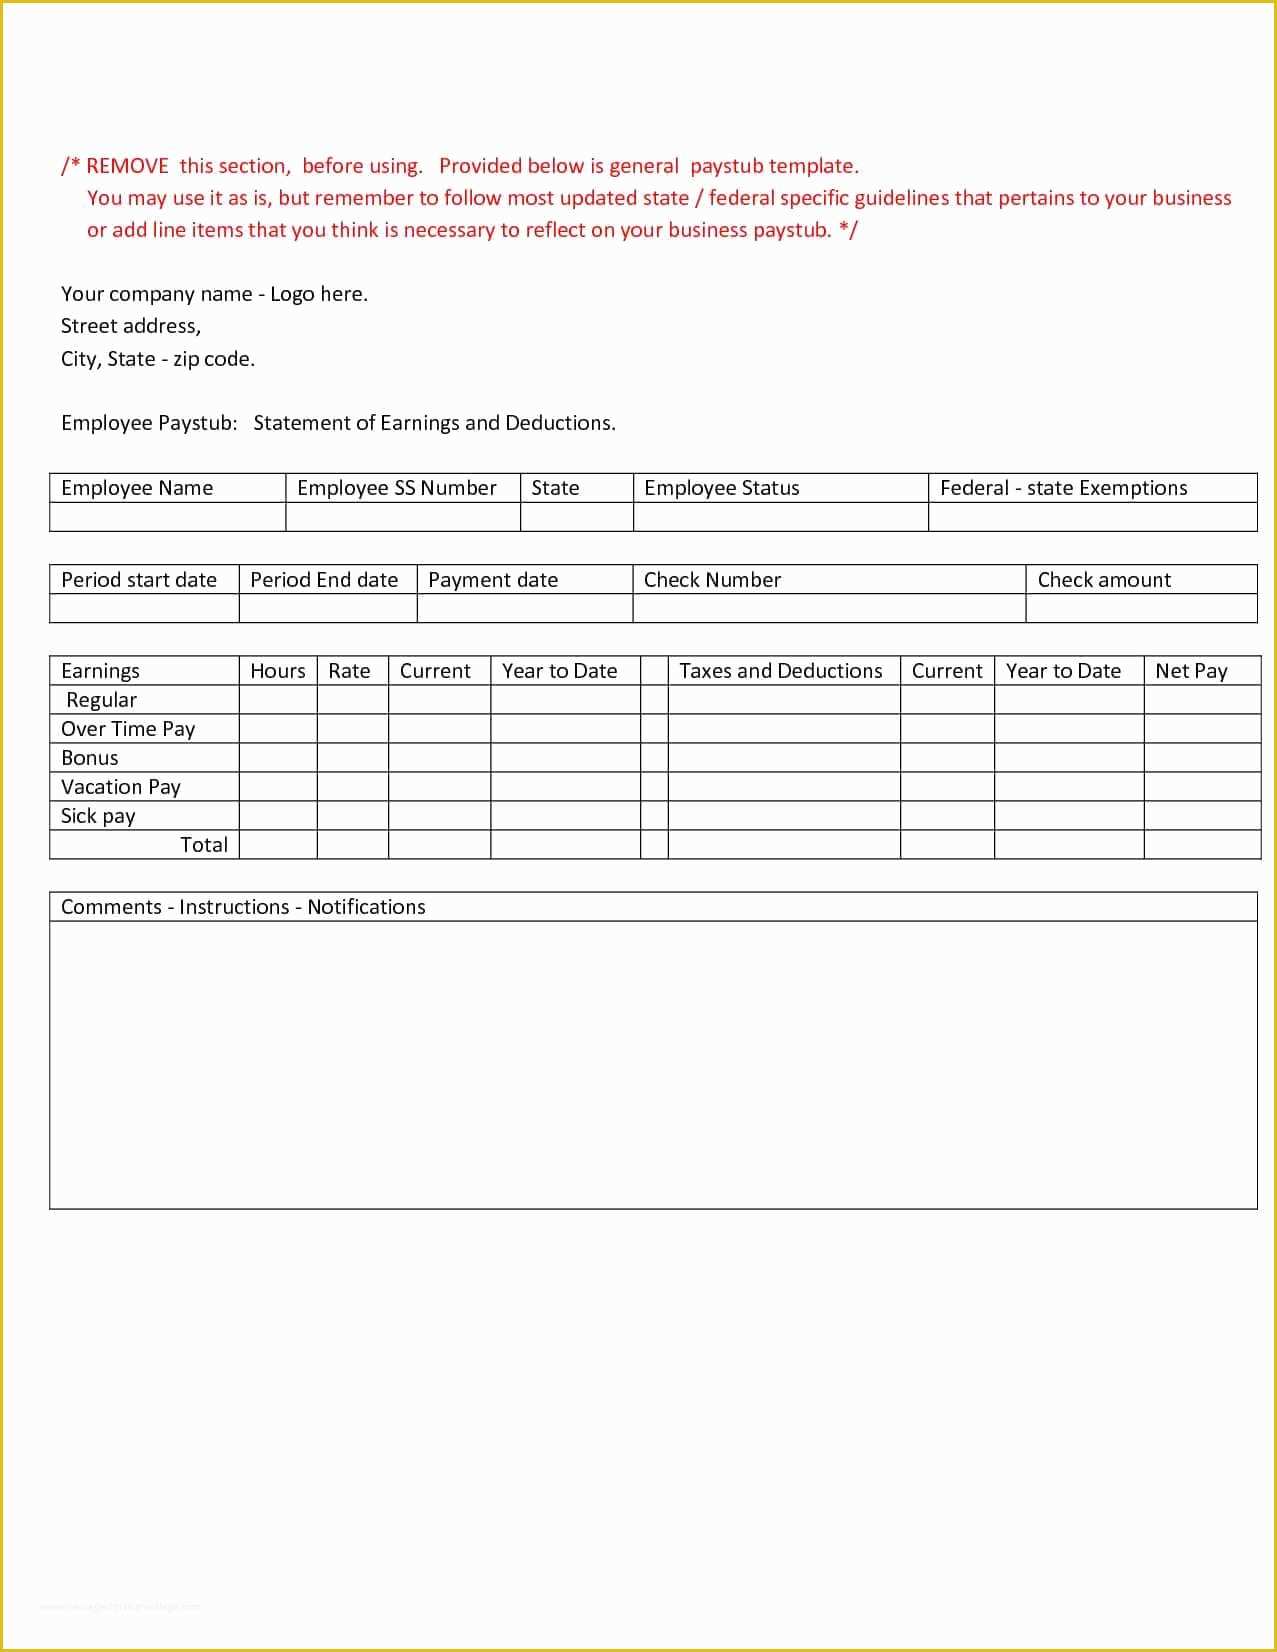 Free Self Employed Pay Stub Template Of Employee Pay Stub Template Ulyssesroom Self Employment